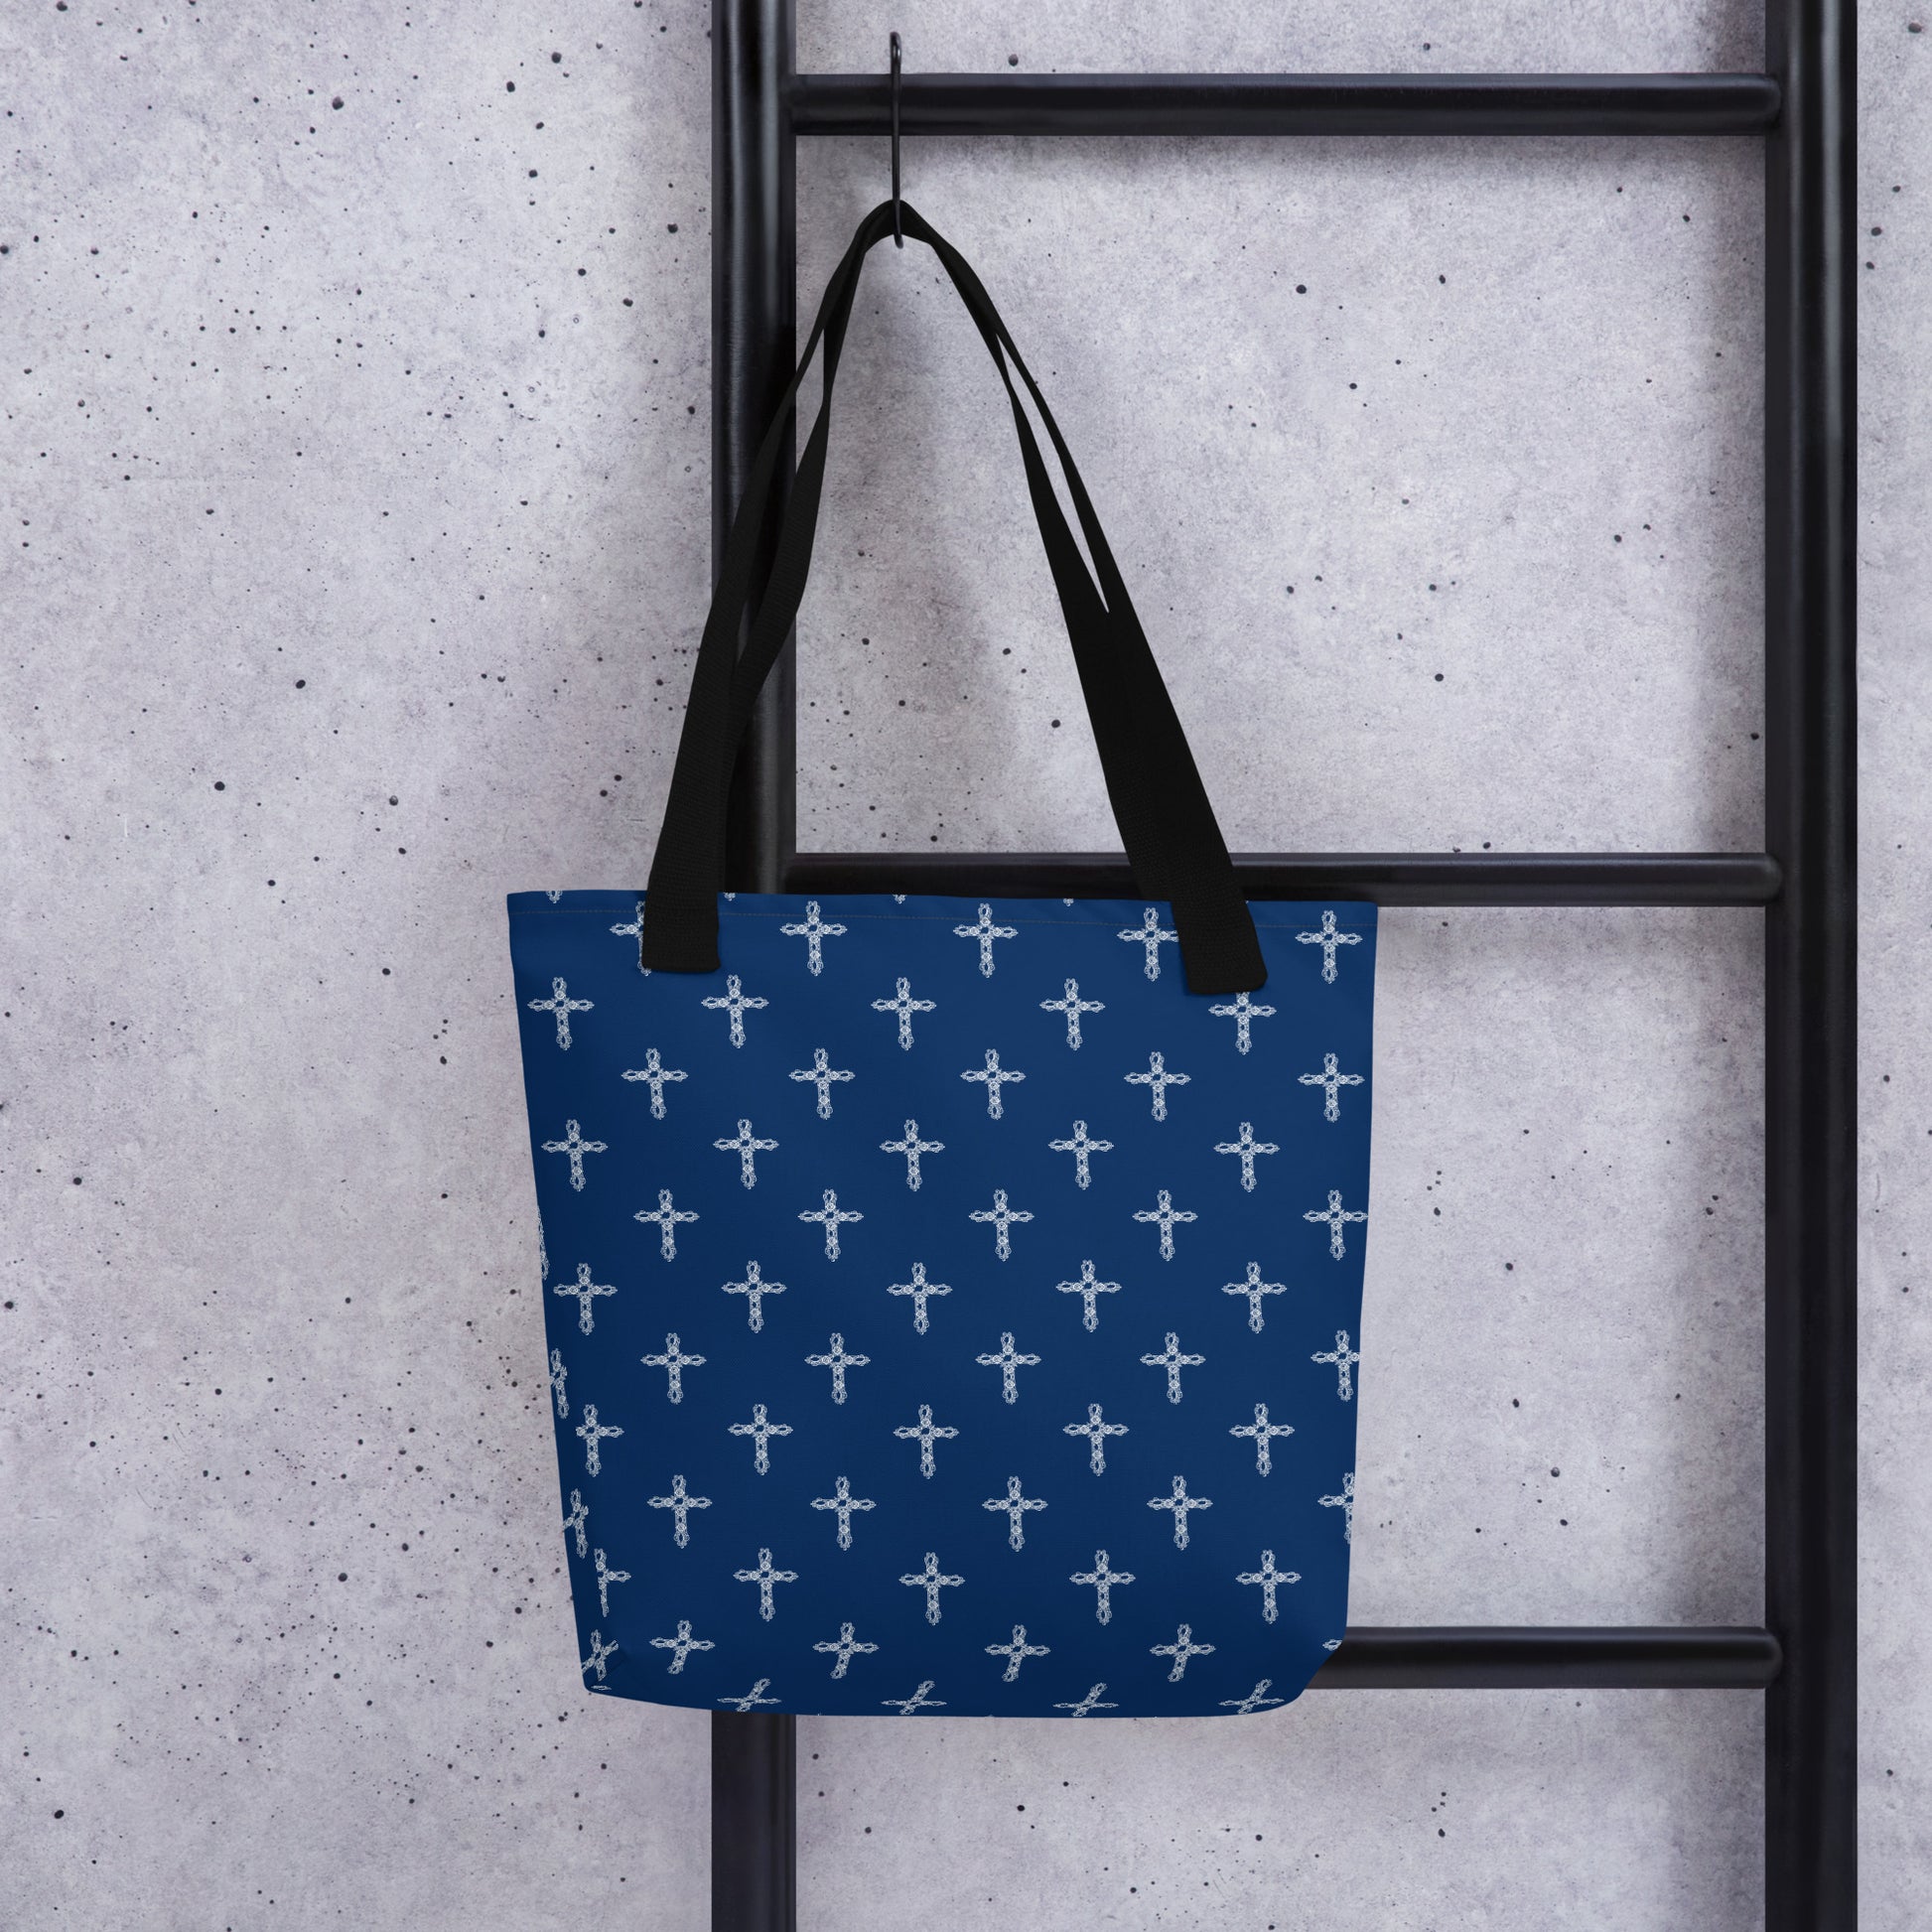 Navy blue tote bag with white crosses on it, hanging on a hook on a black ladder.